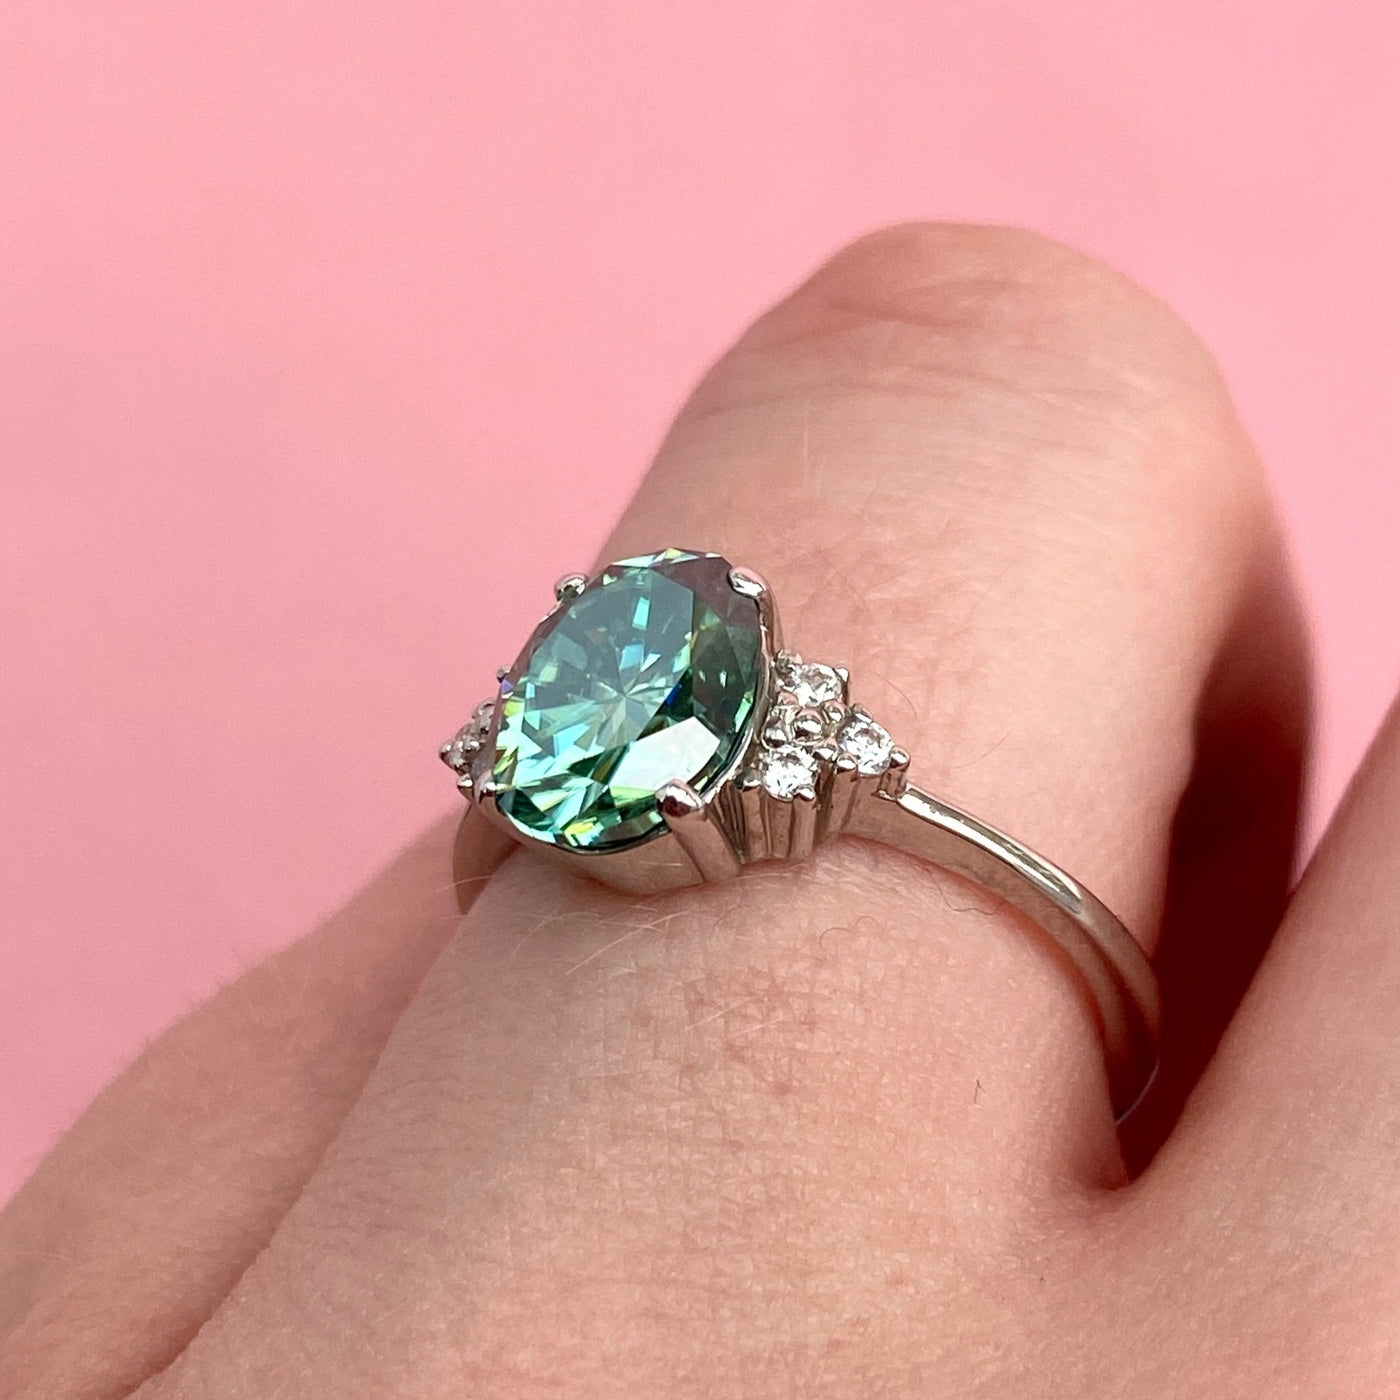 Henrietta - Oval Cut Teal Moissanite Ring with Round Brilliant Cut Diamond Side Stones - Custom Made-to-Order Design